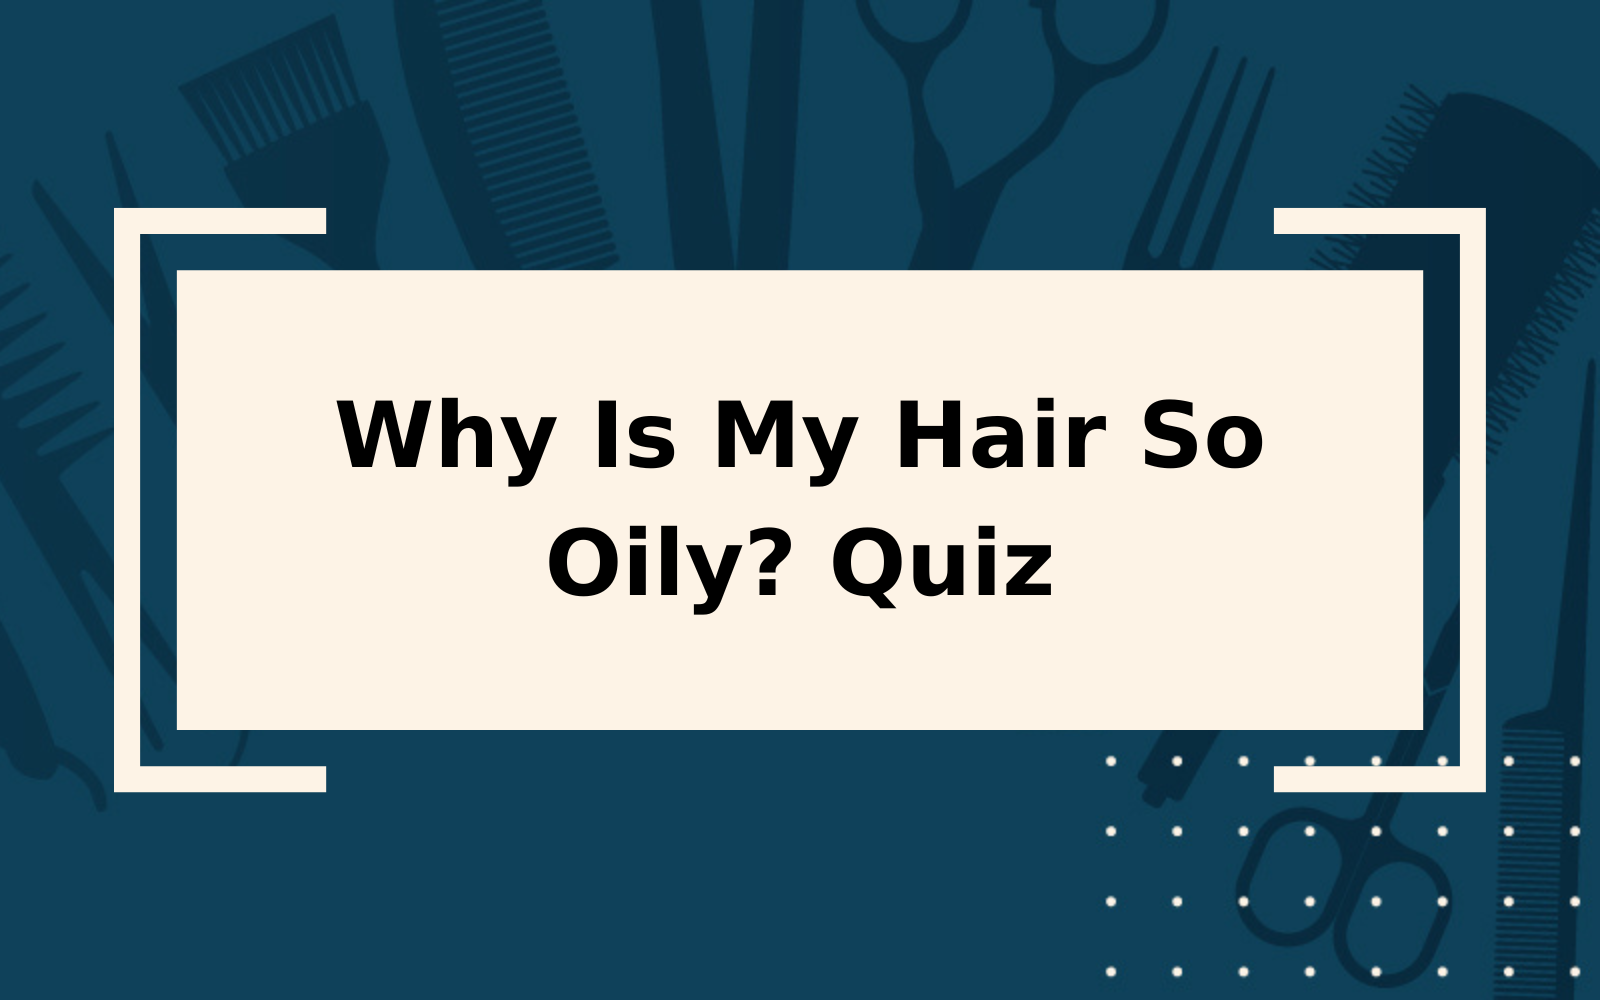 Why Is My Hair So Oily (and How Can I Fix It)?